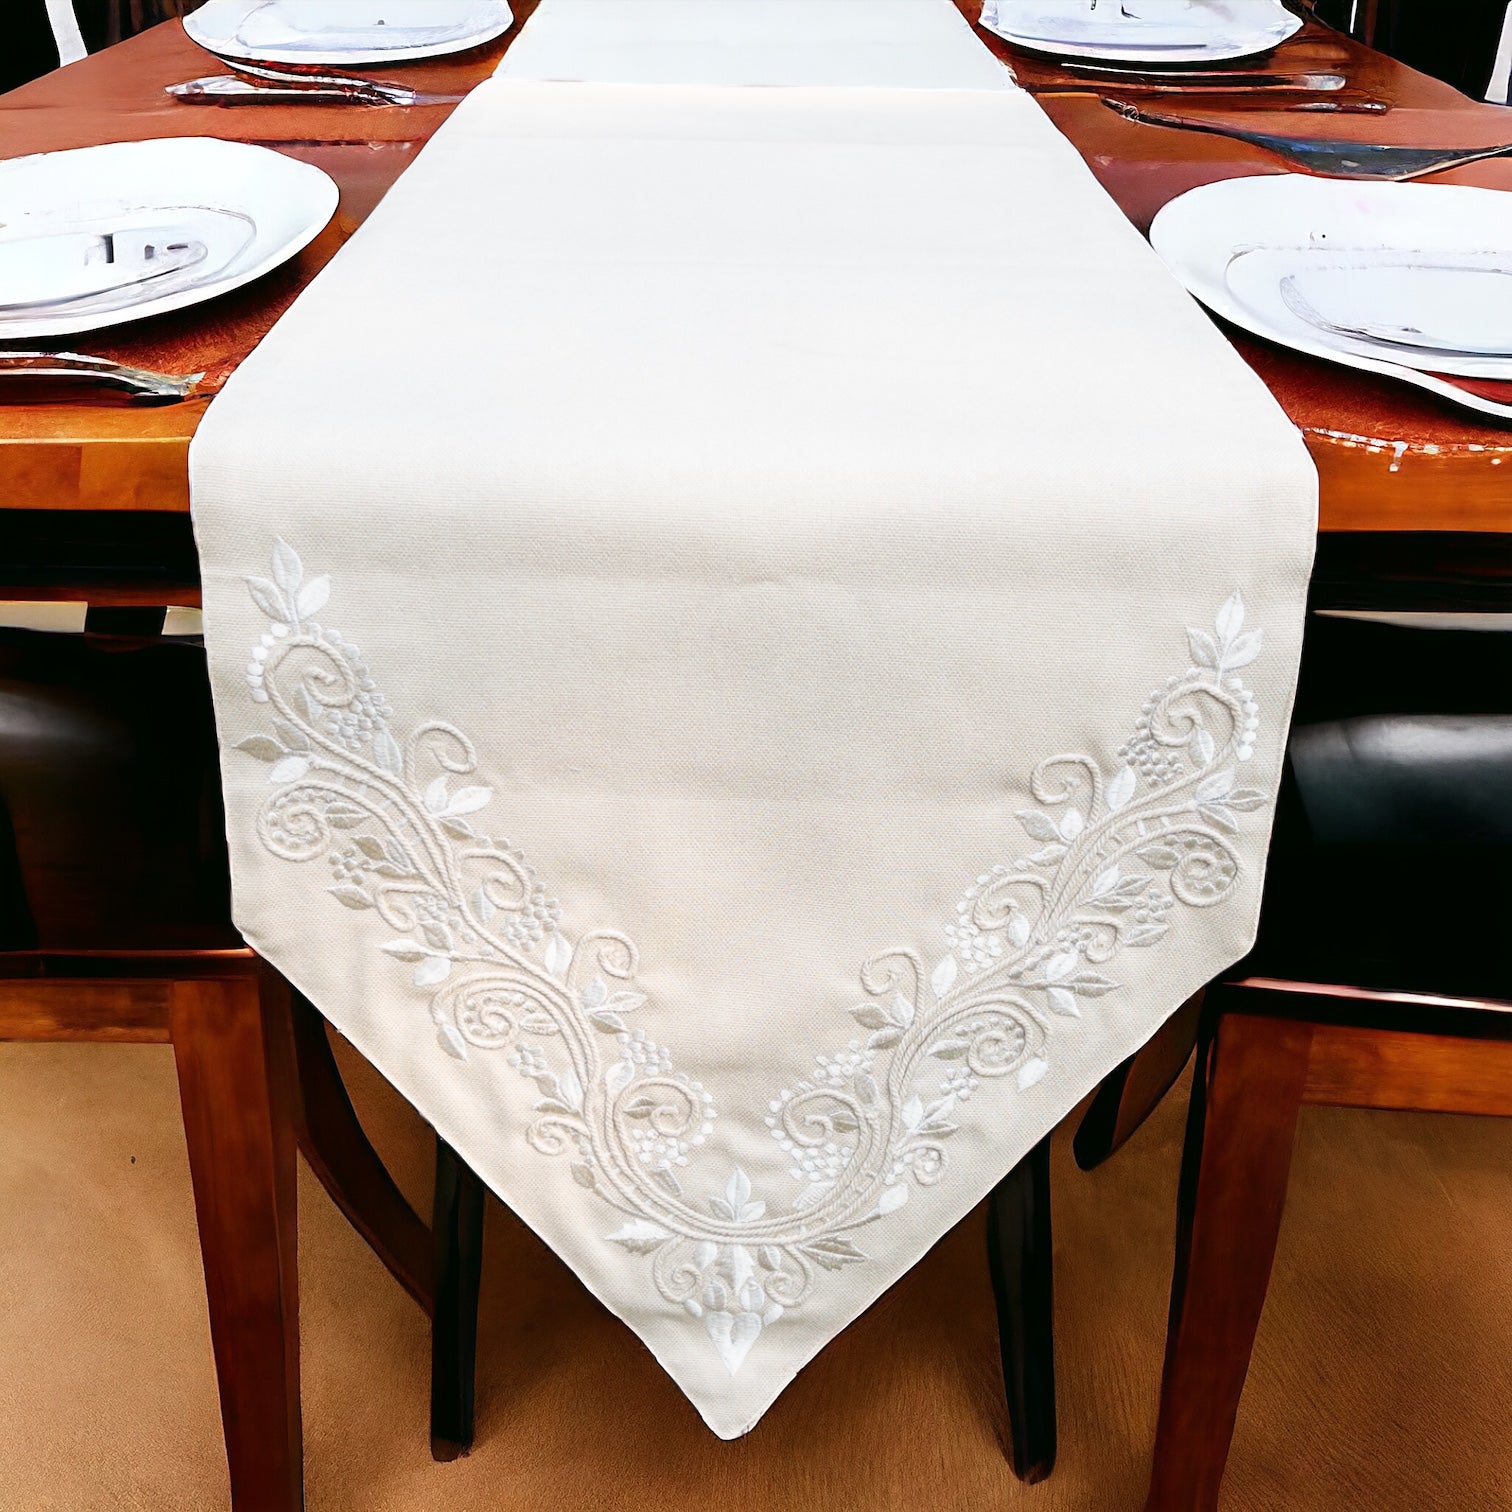 Formal table runner with embroidered detail, placed on a dining table